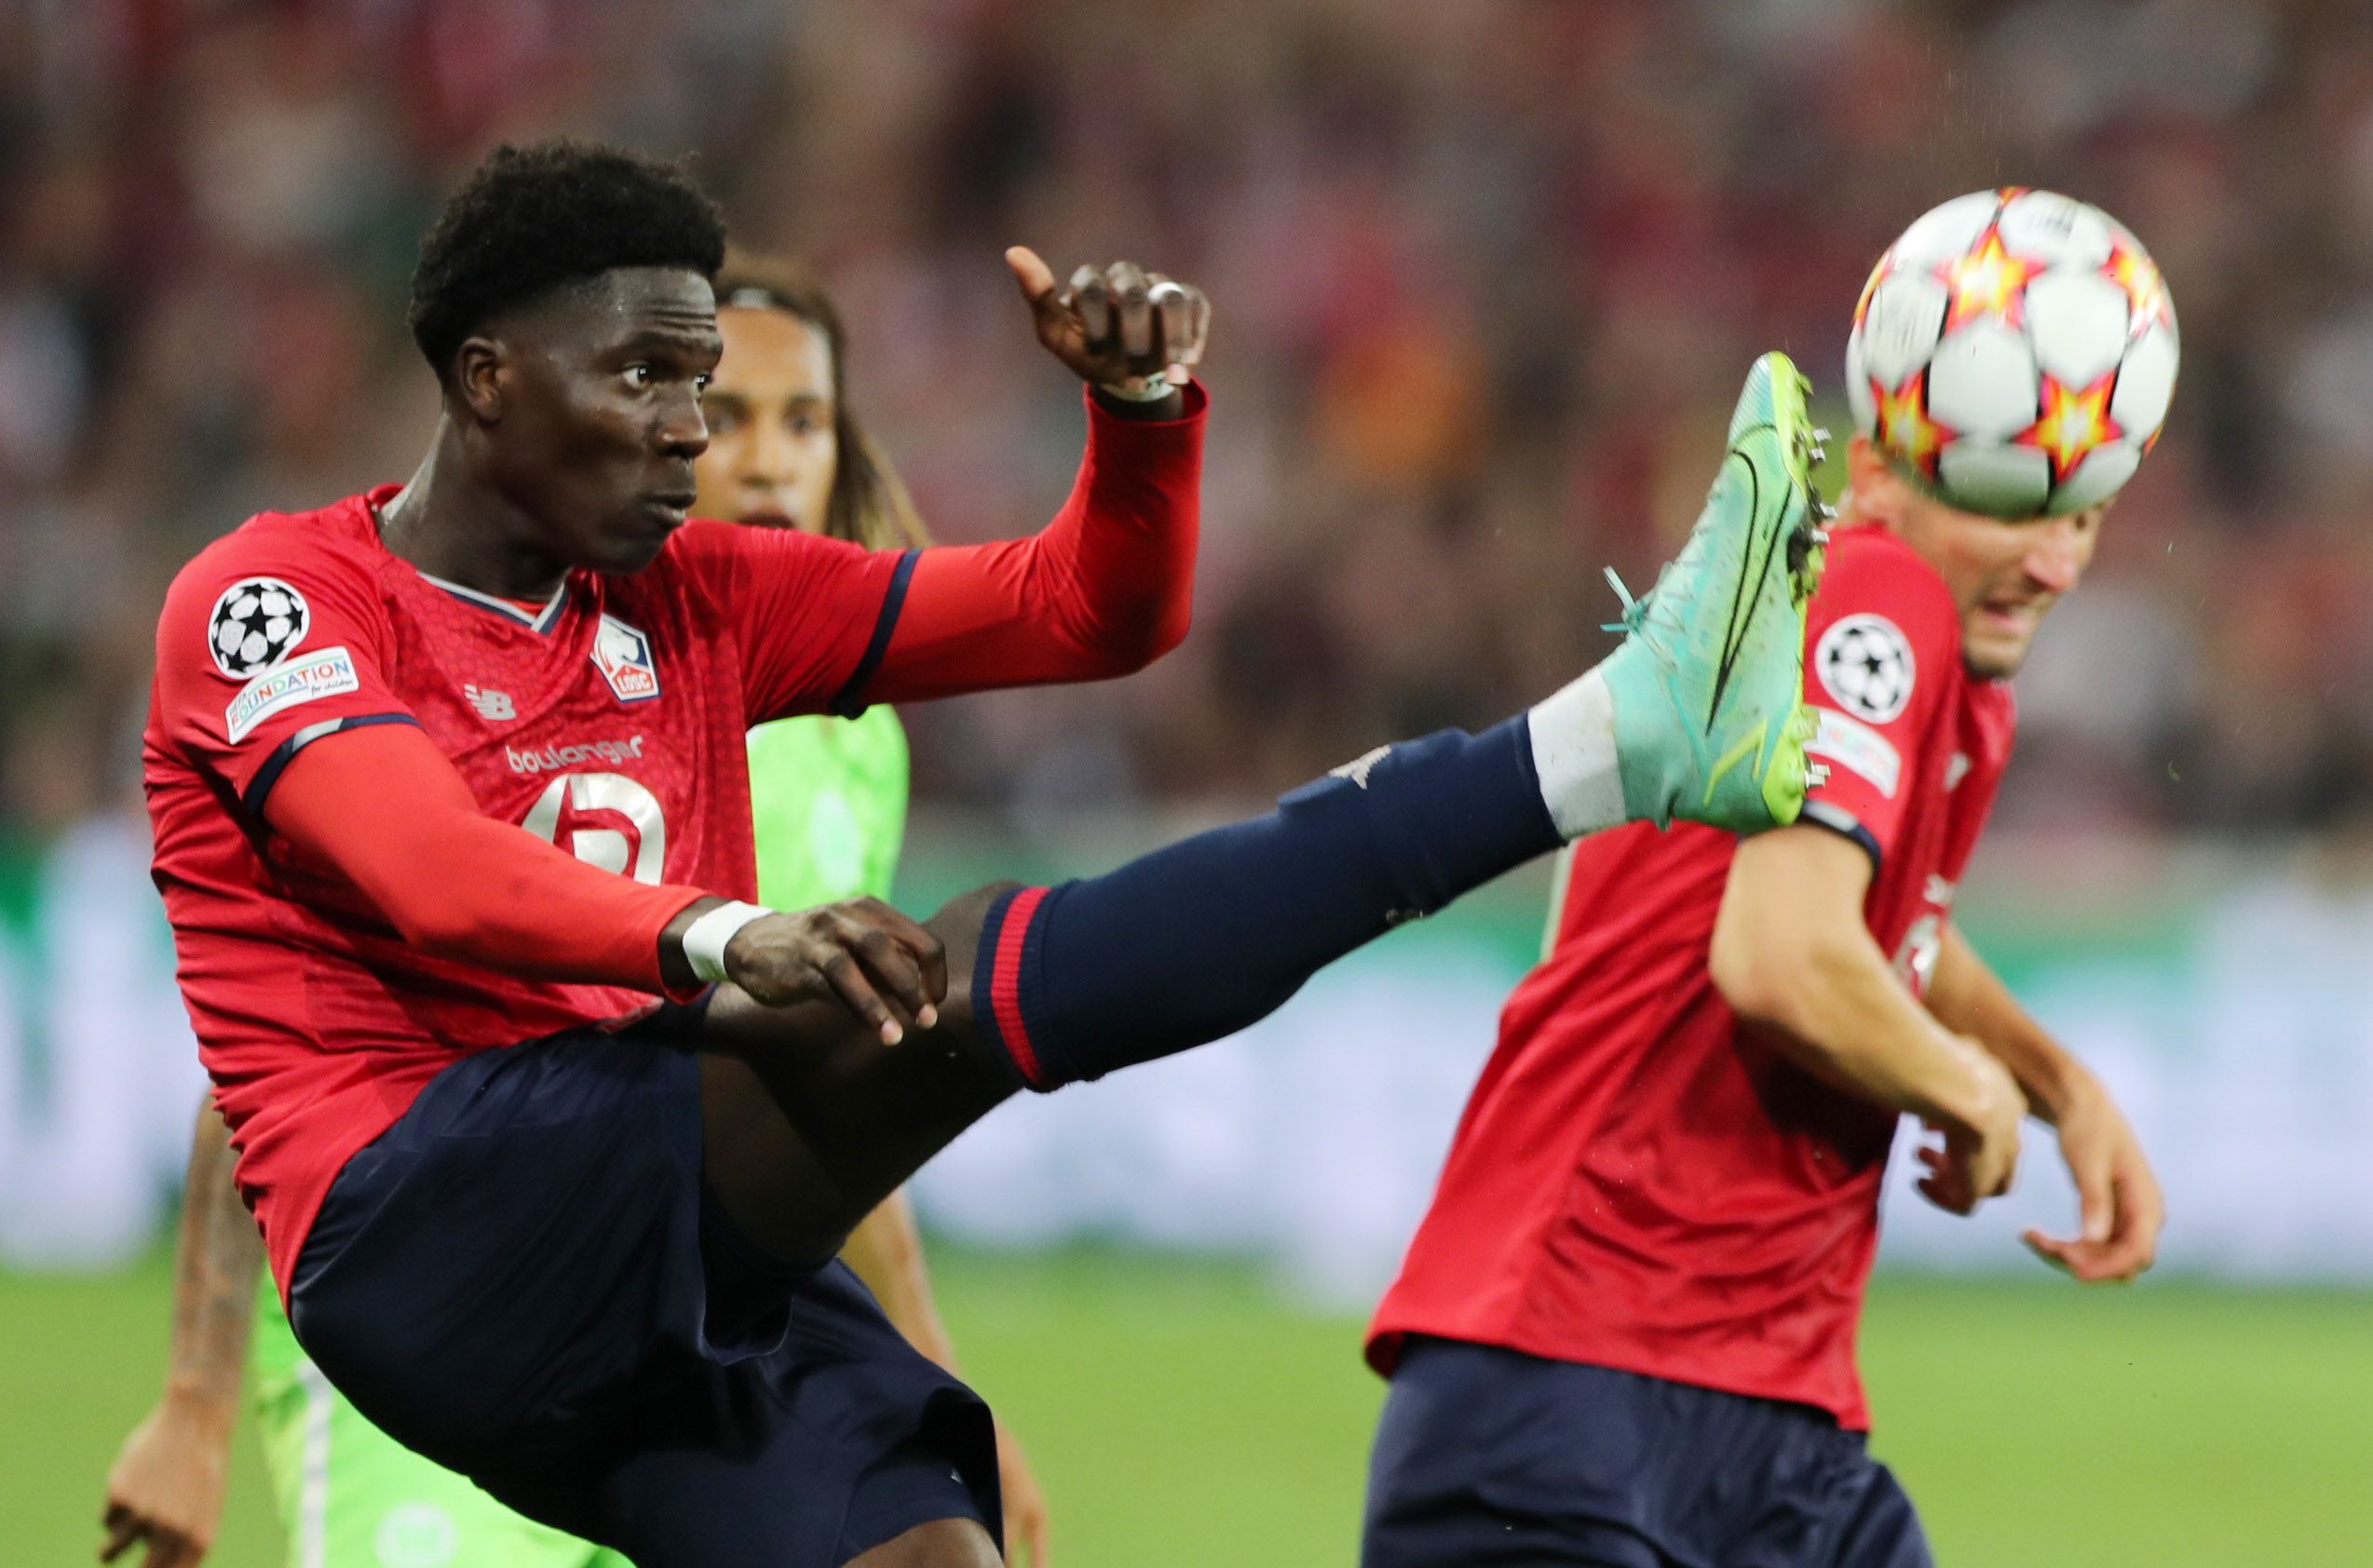 Soccer Football - Champions League - Group G - Lille v Vfl Wolfsburg - Stade Pierre-Mauroy, Villeneuve-d'Ascq, France - September 14, 2021  Lille's Amadou Onana in action REUTERS/Pascal Rossignol